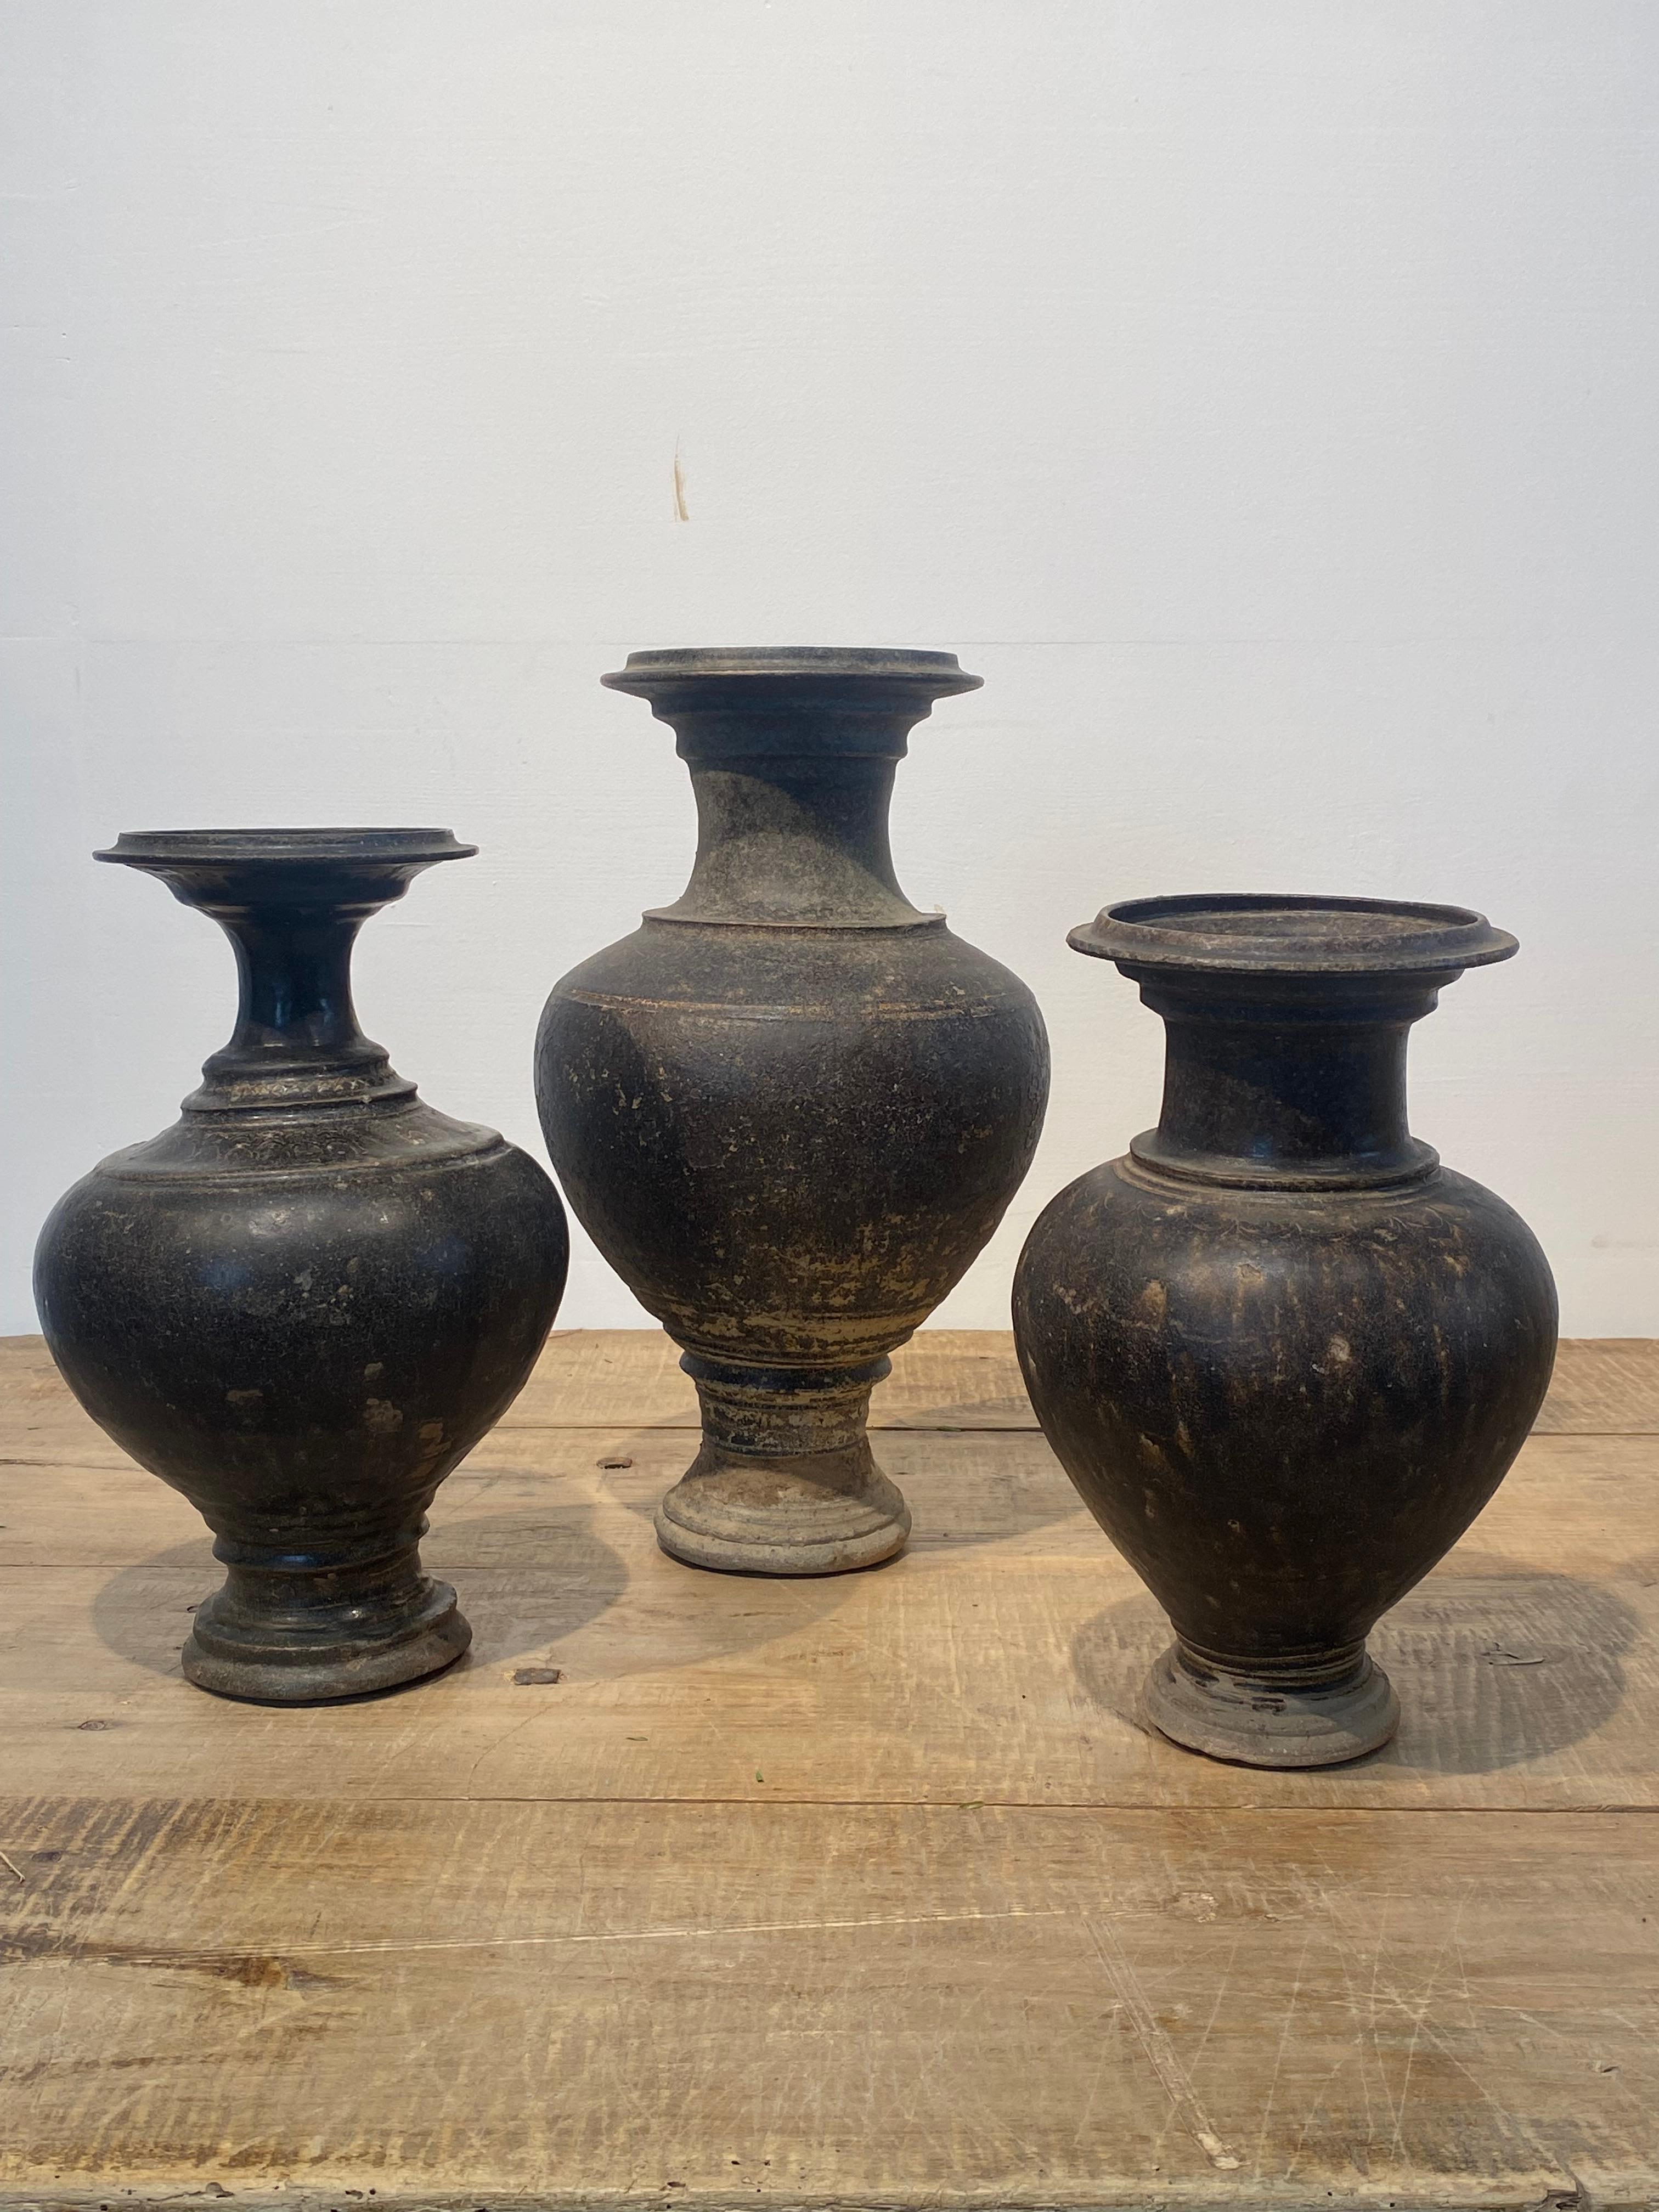 Set of 3 Khmer Vases from the Cambodia-Thailand region in South East Asia,
11-13 th Century,
the vases have a great patina and shine and are very decorative,
fine decorations and simple and elegant design,
the vases are beautiful when decorated in a